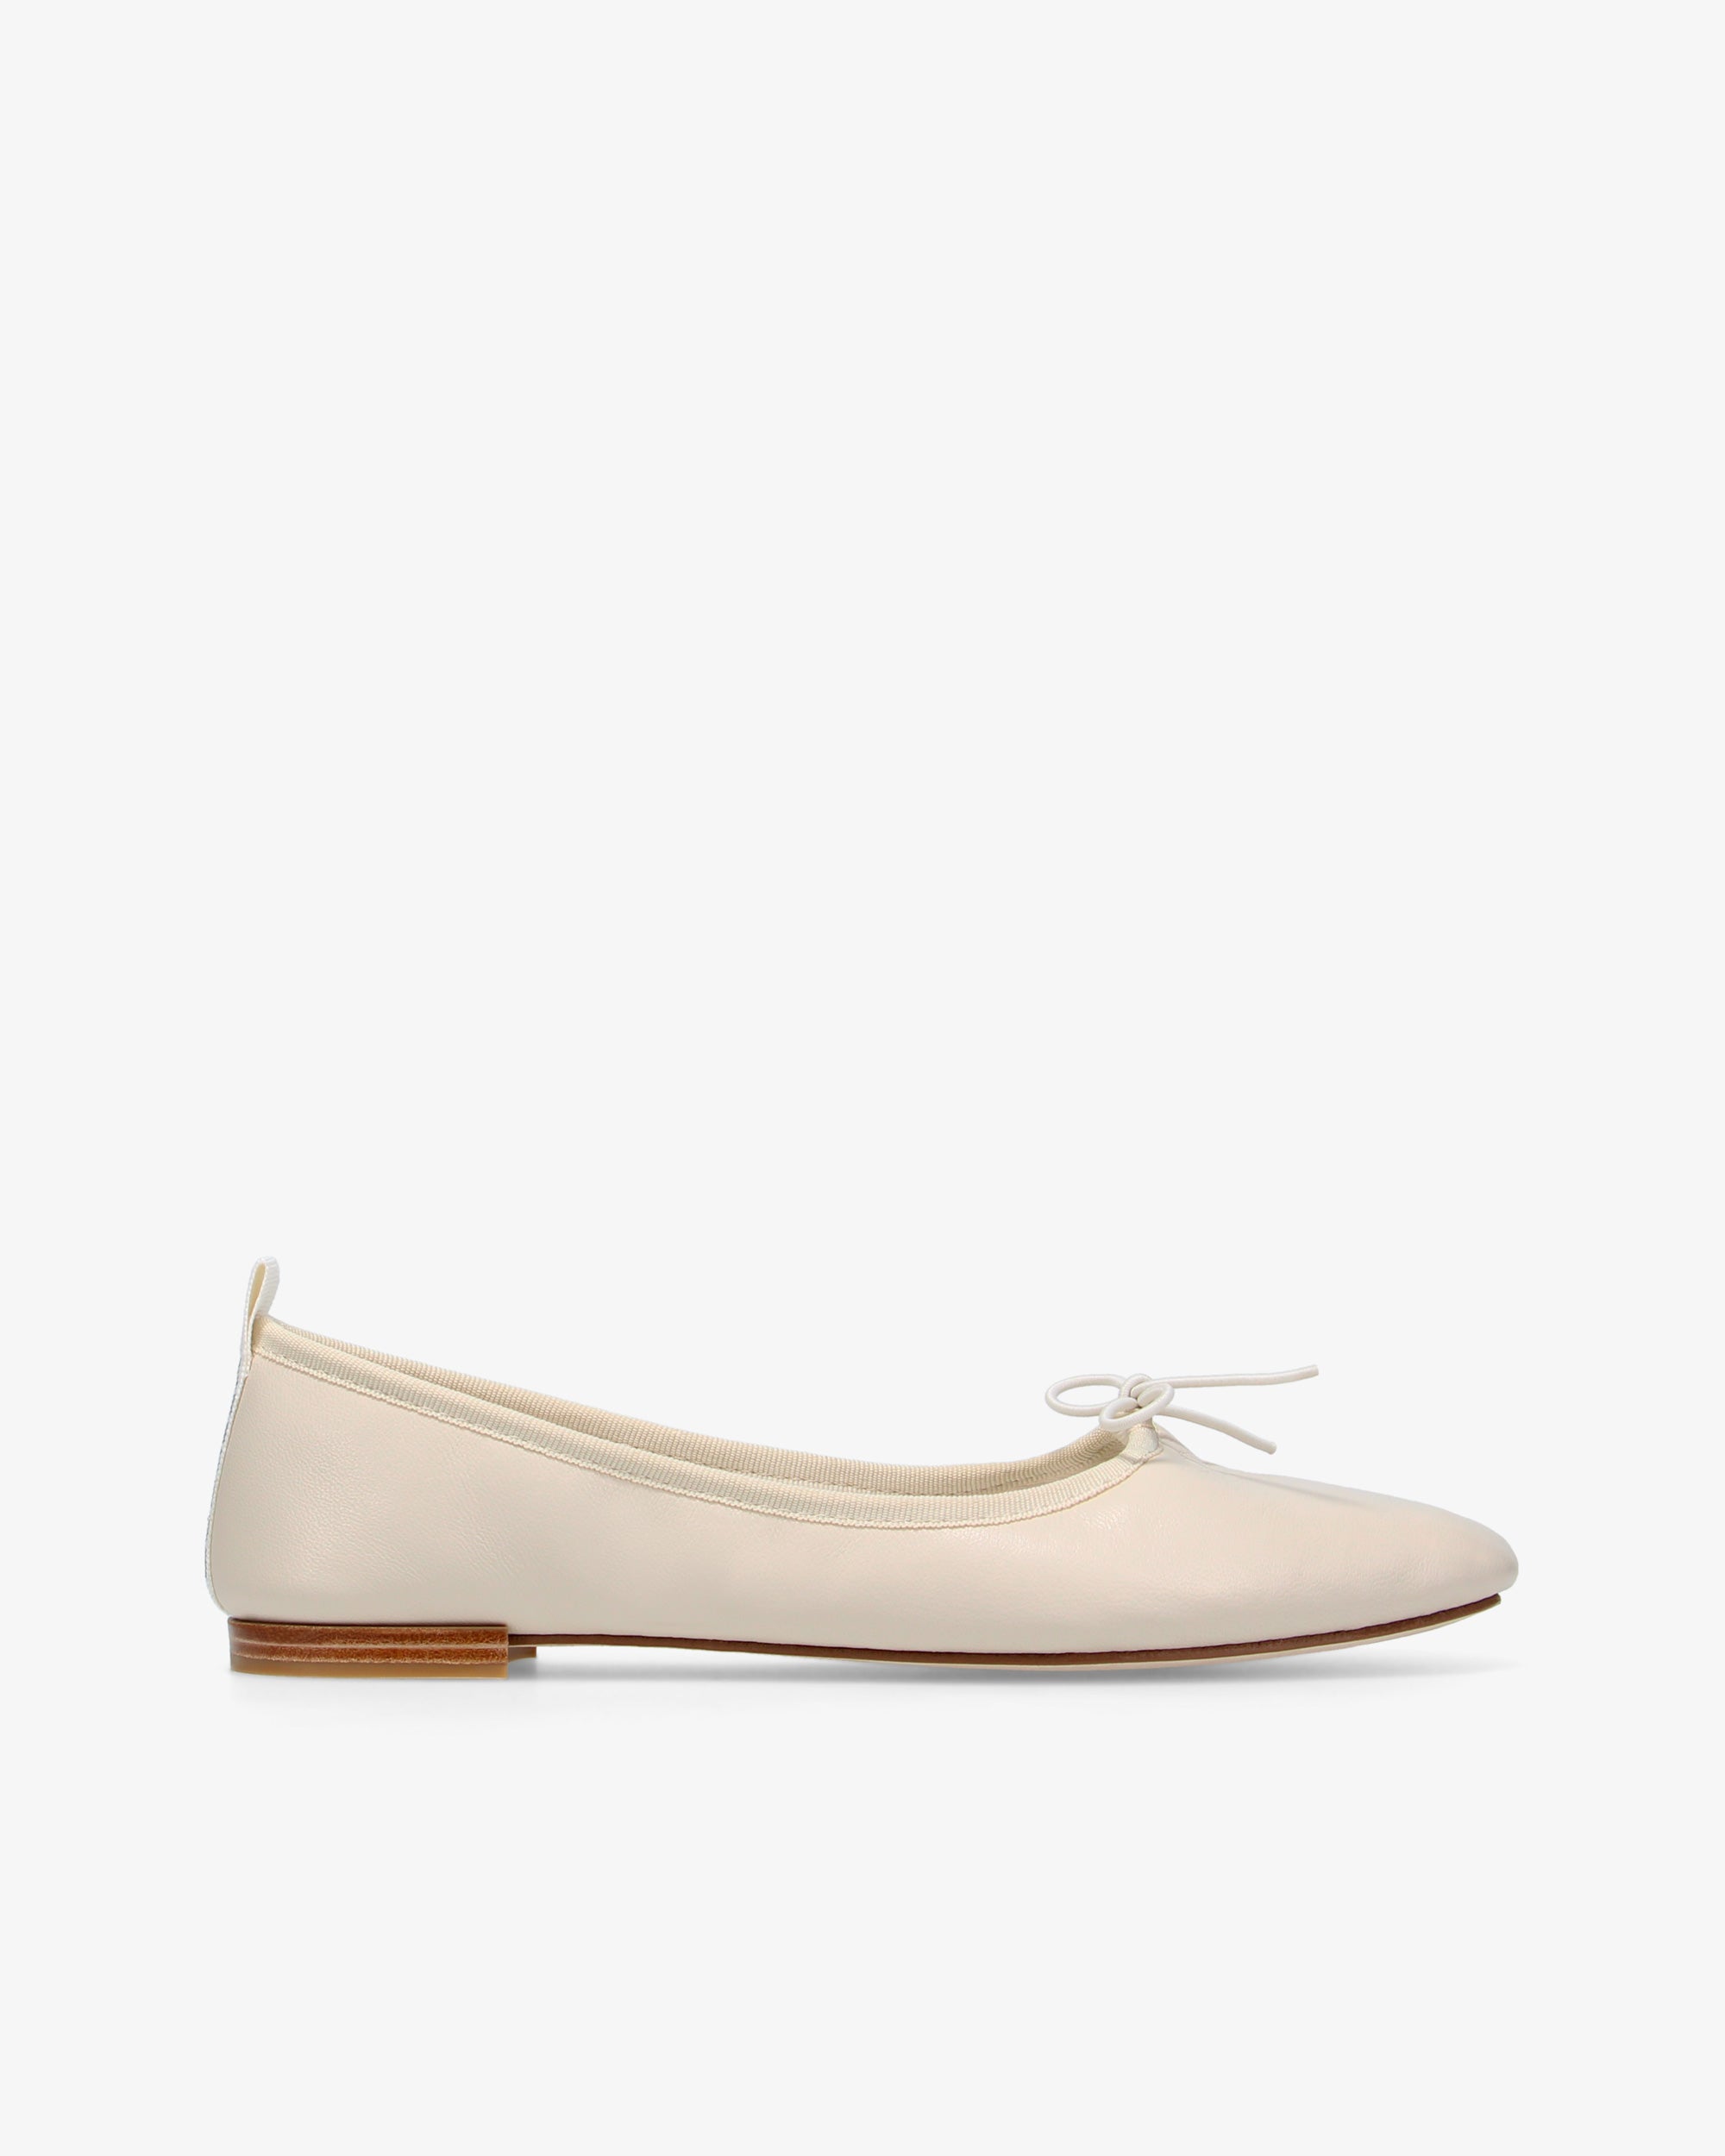 Repetto | New Collection